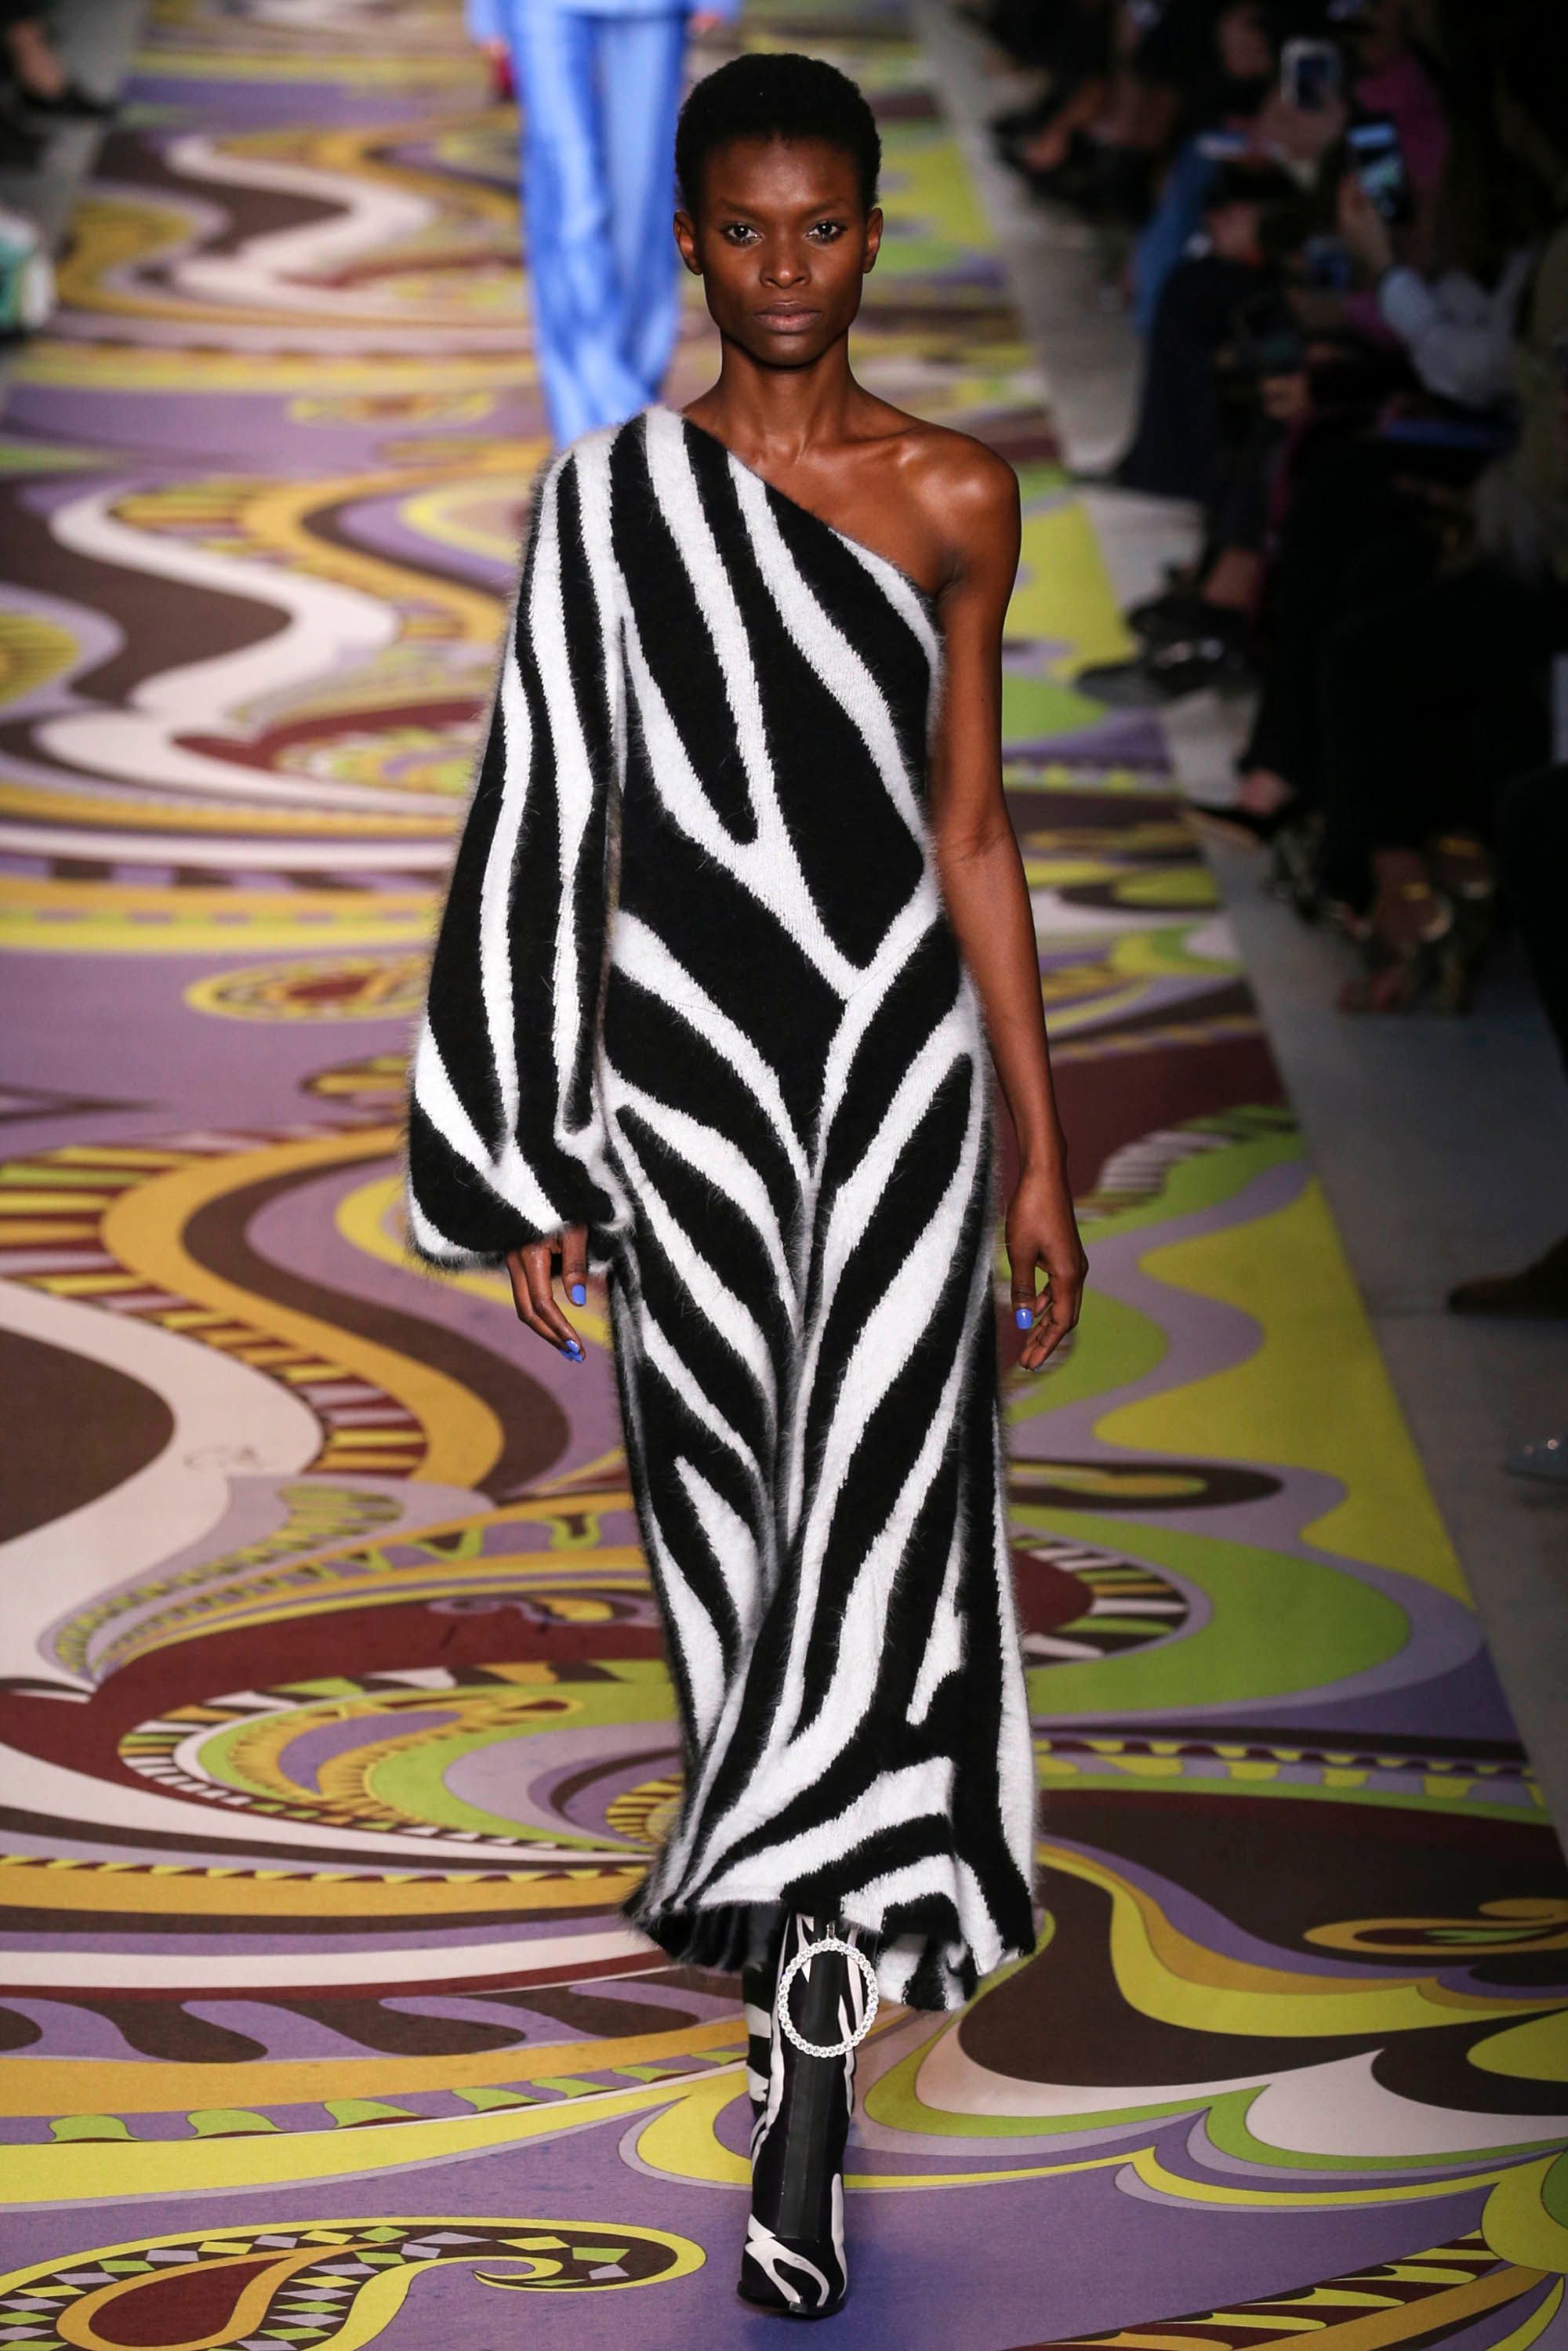 EMILIO PUCCI, Paris, France, “I love it when I catch you looking at me”,  photo by Visualplex, pinned by Ton van der Veer